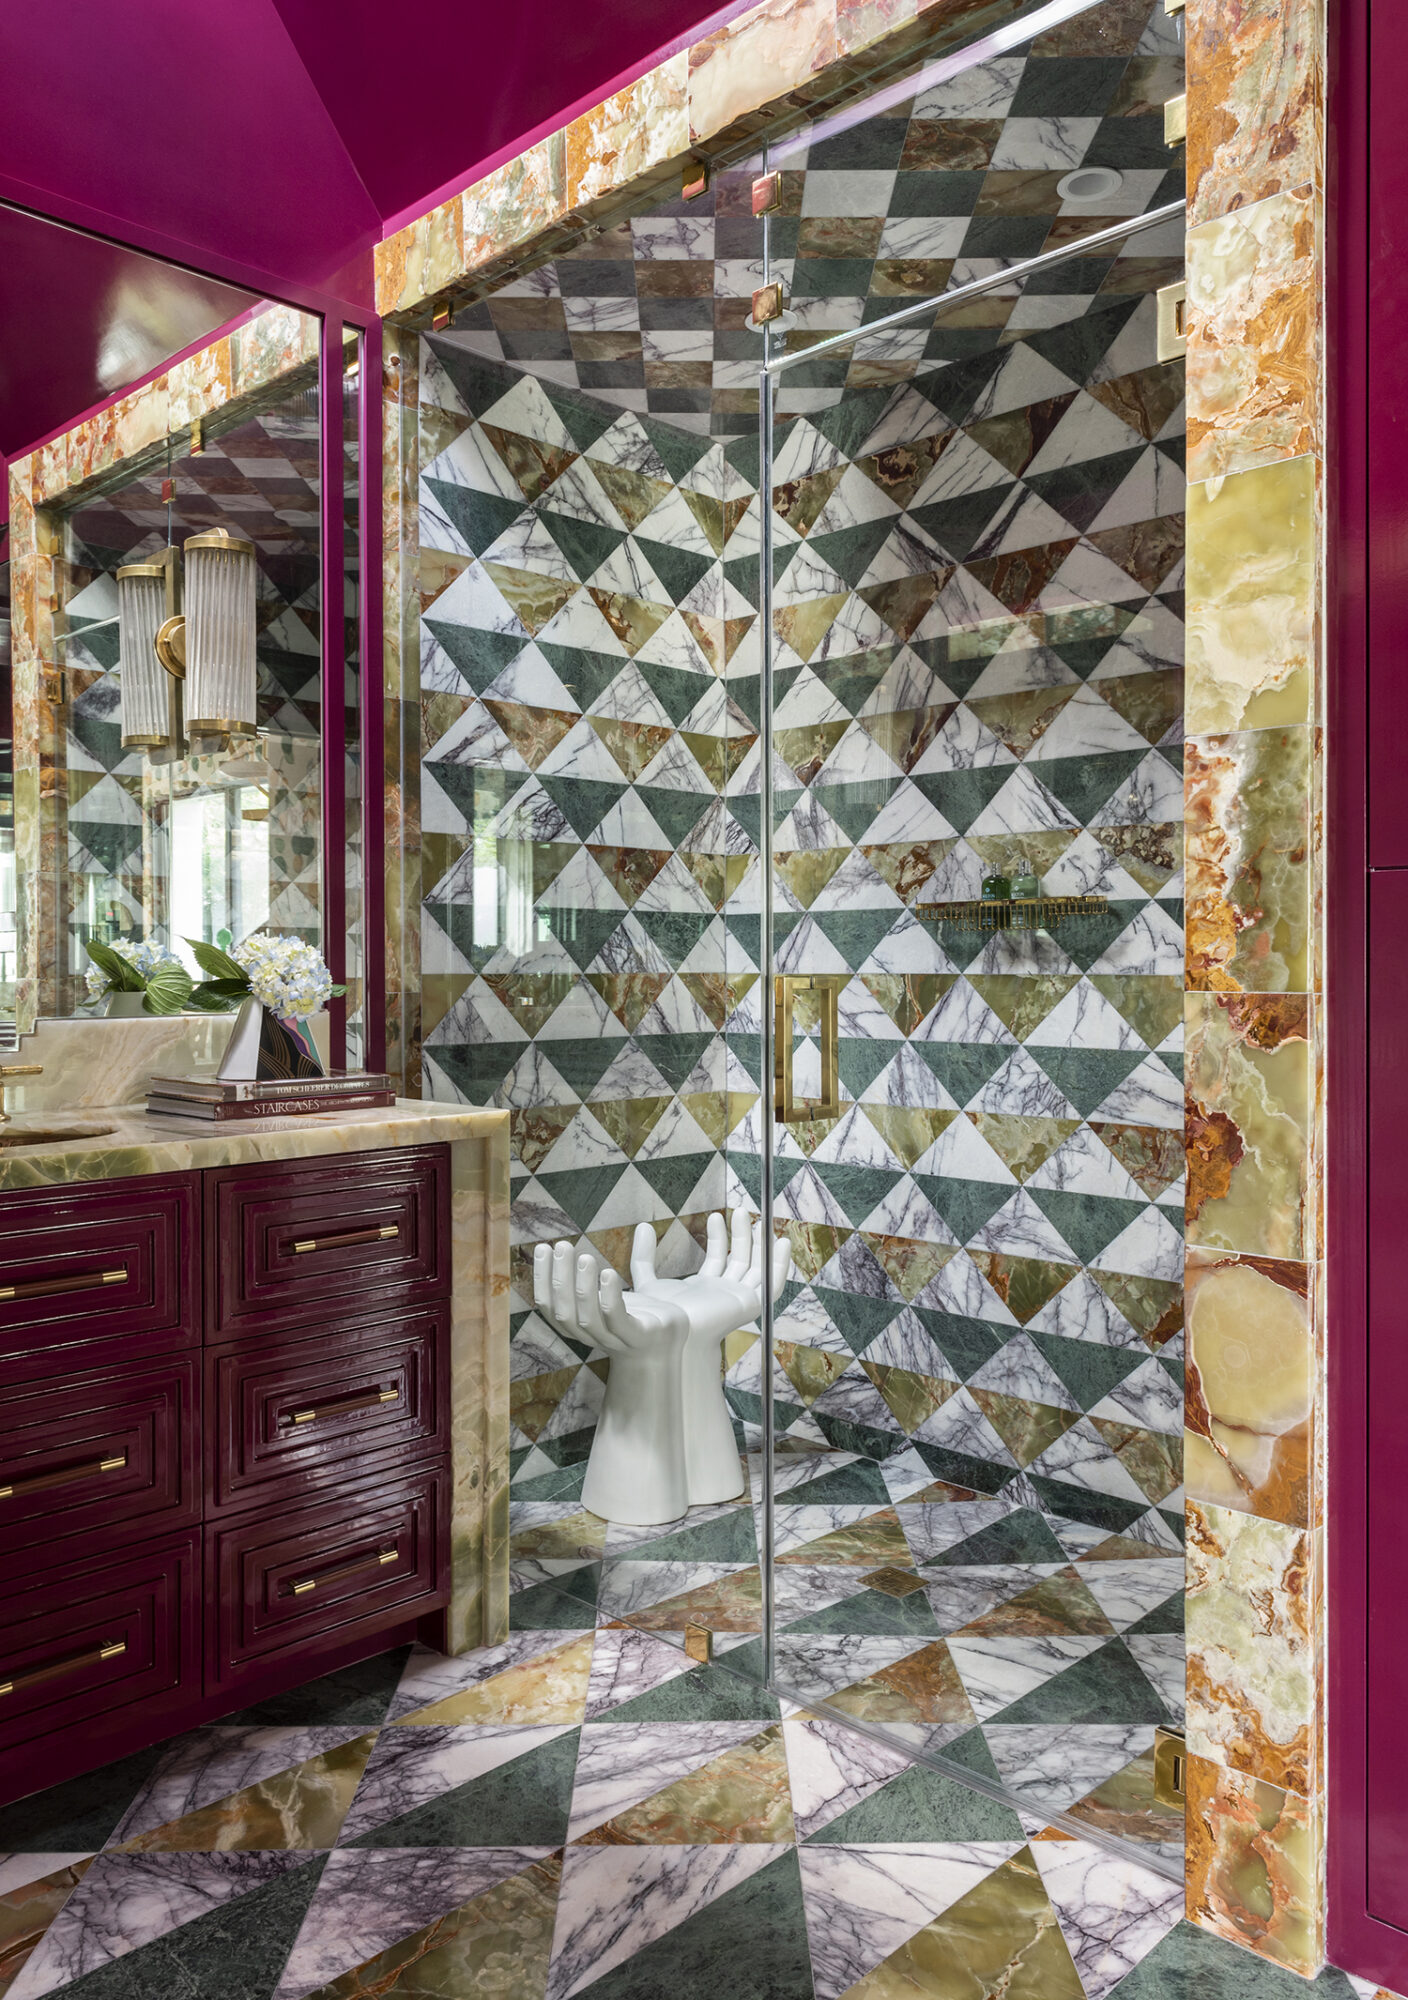 burgandy, brown and teal maximalist bathroom with patterned shower and floor